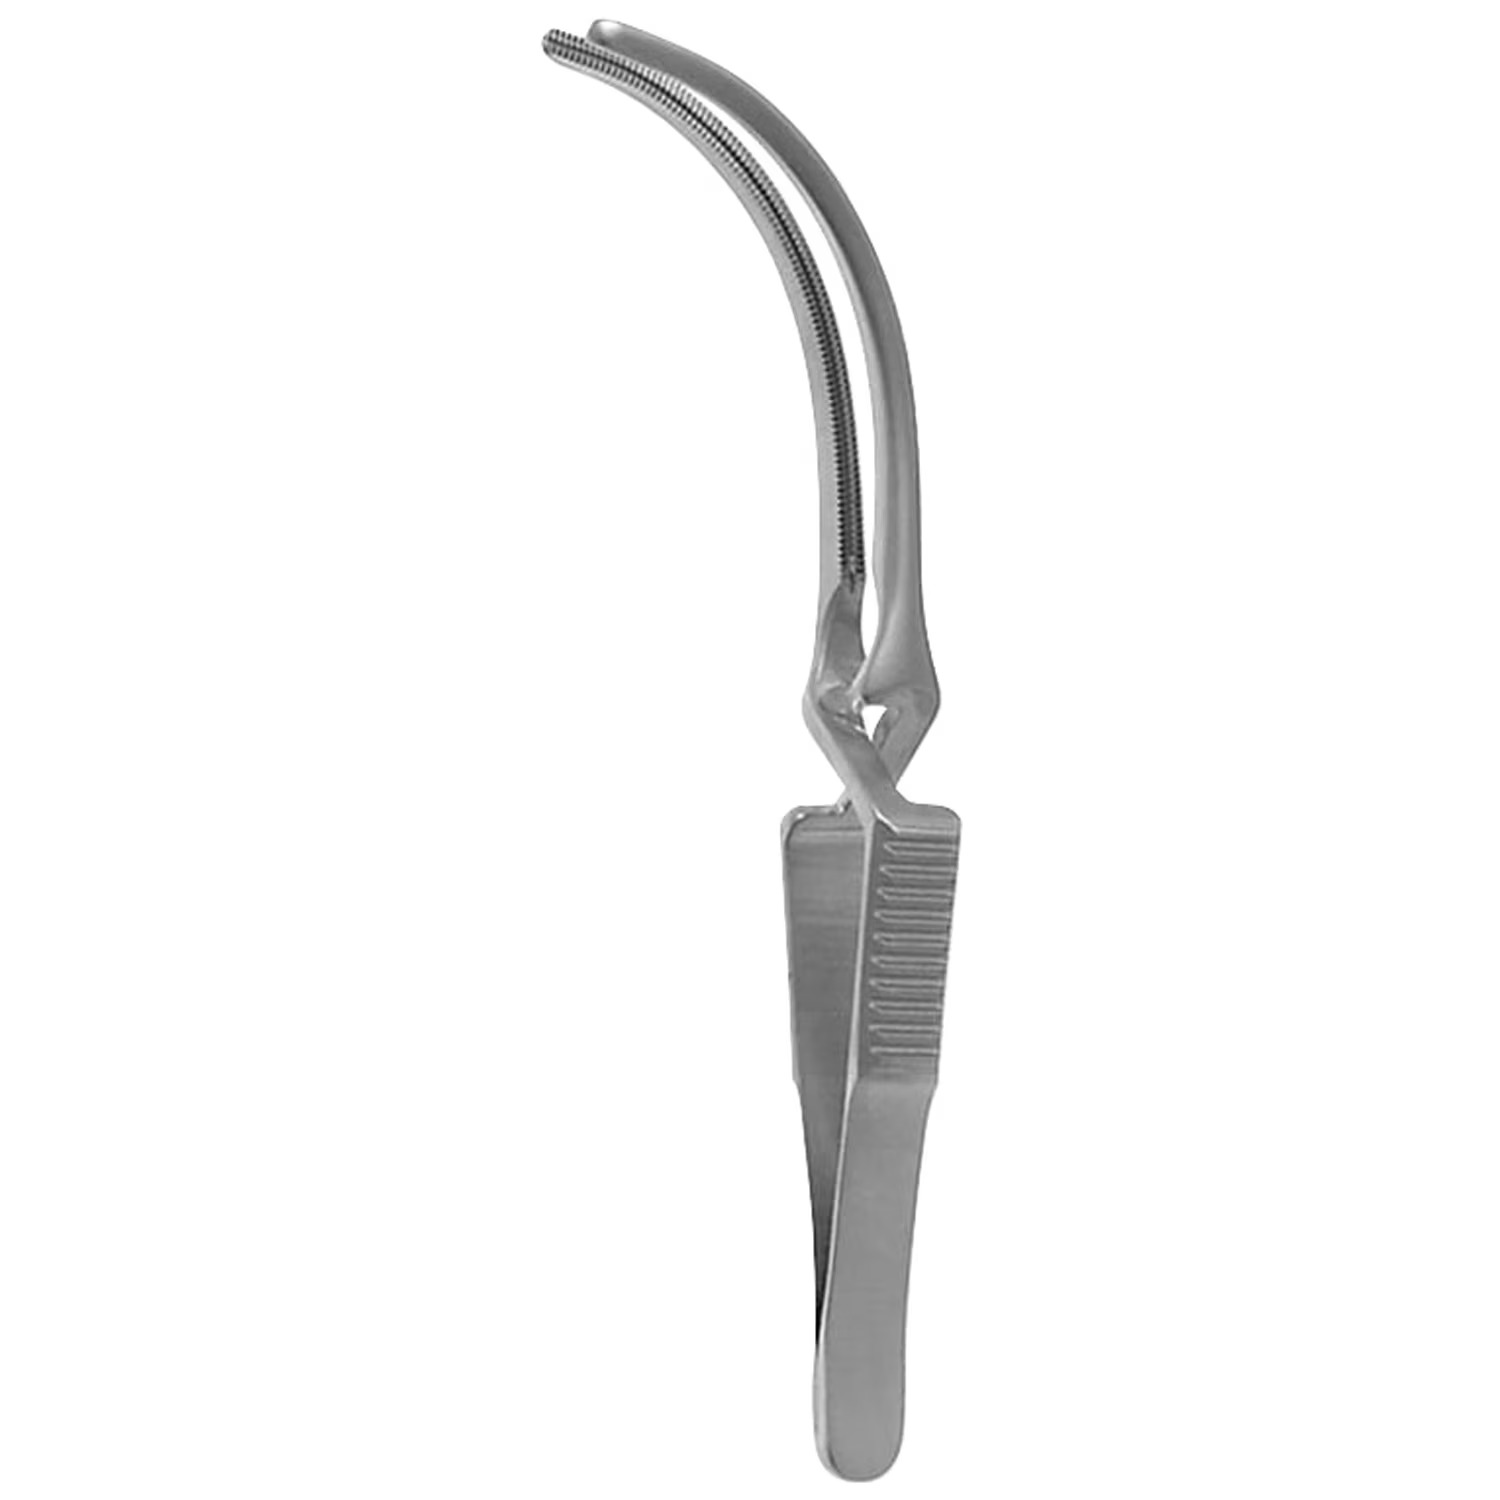 Cooley Cross Action Bulldog Clamps German Stainless Steel Micro Surgery Clamps Good Quality Surgical Instruments